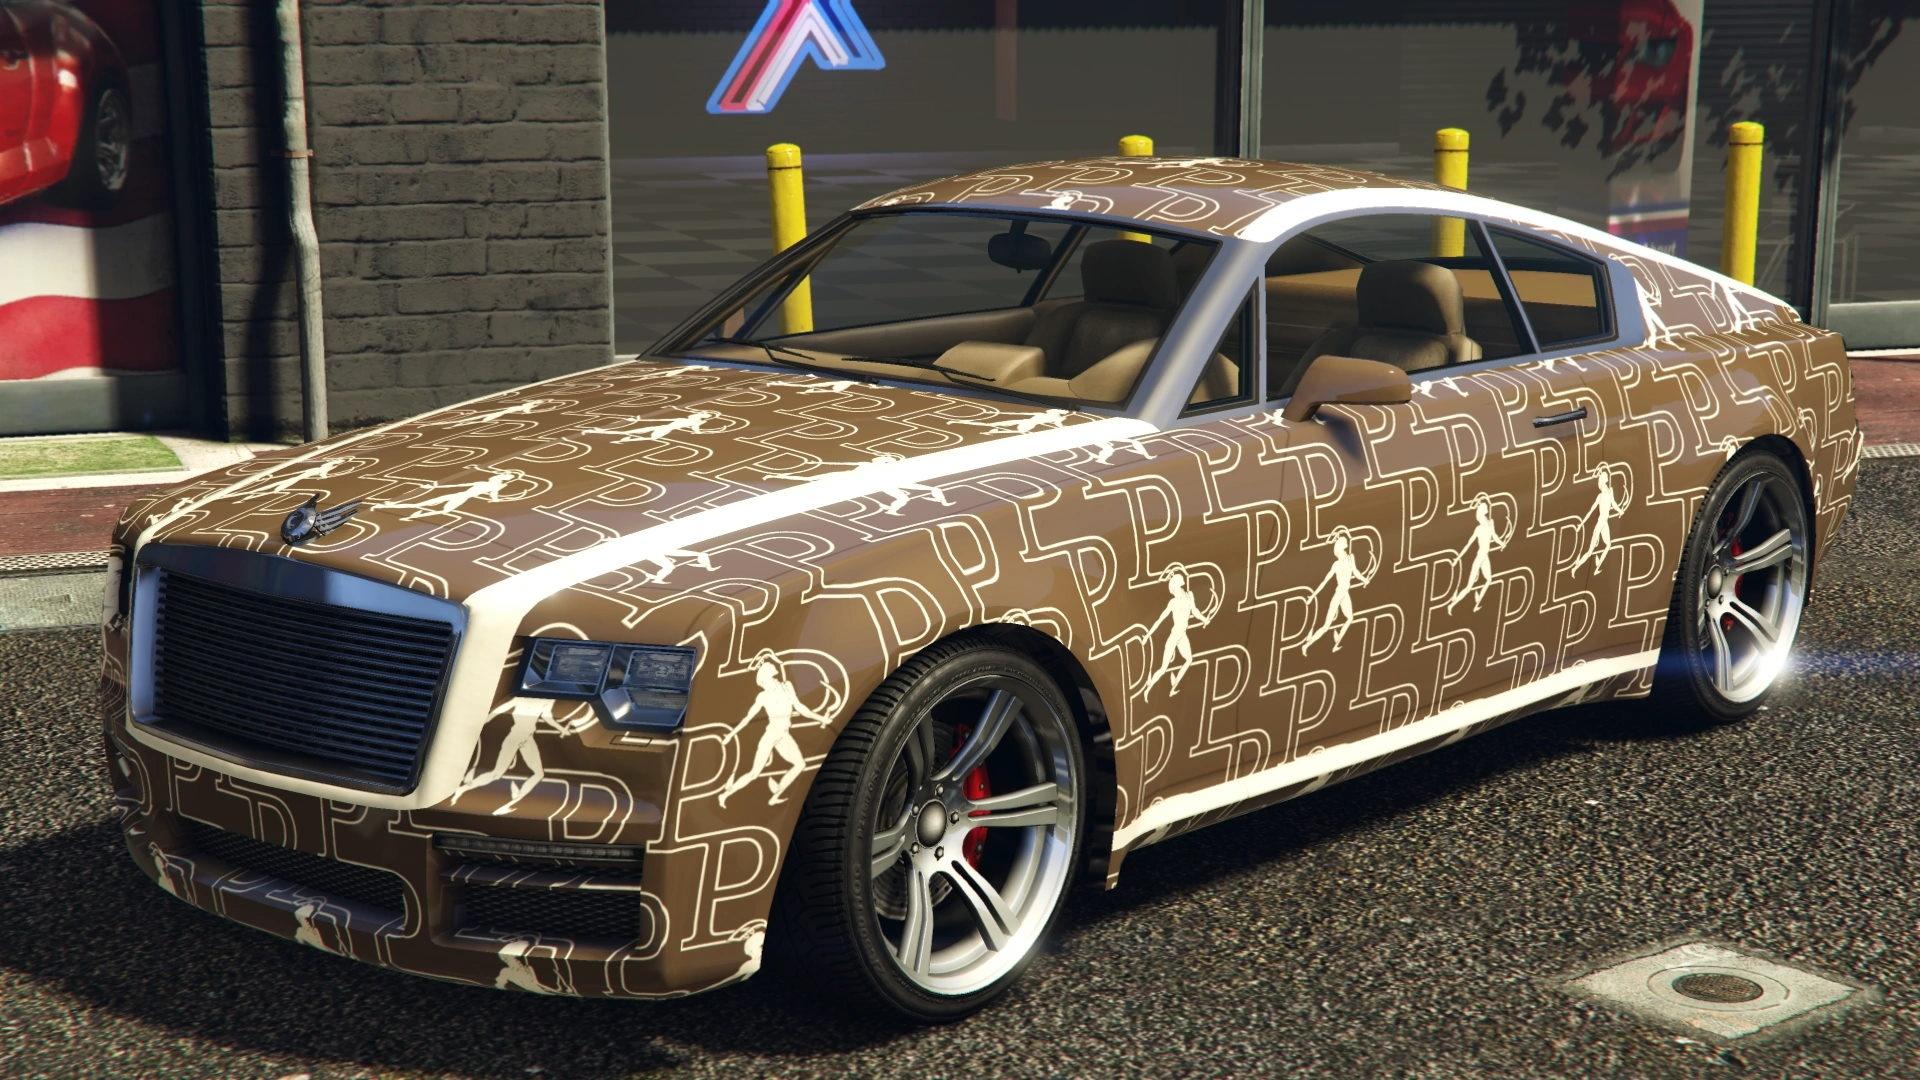 What brand is Louis Vuitton in GTA 5